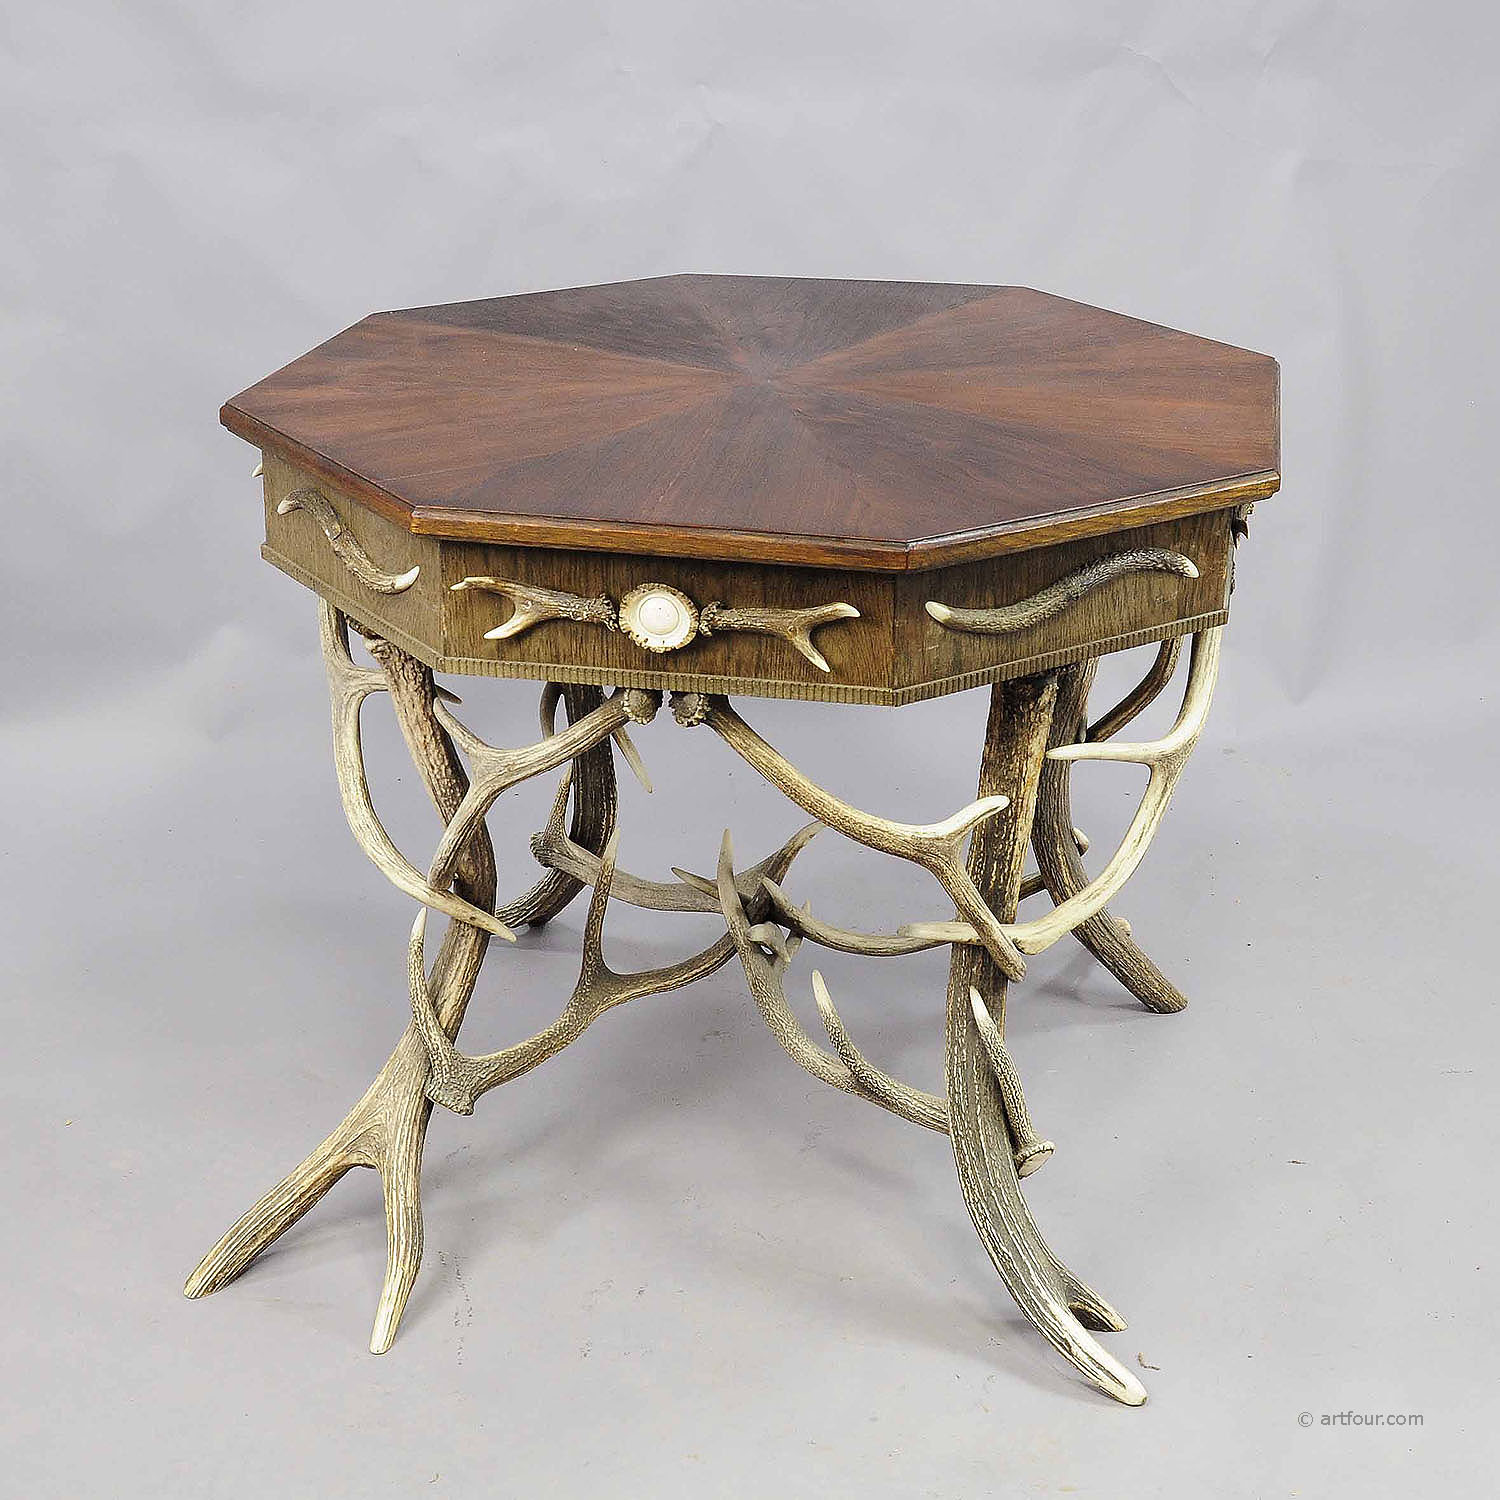 Elaborately Crafted Octagonal Antler Table ca. 1900